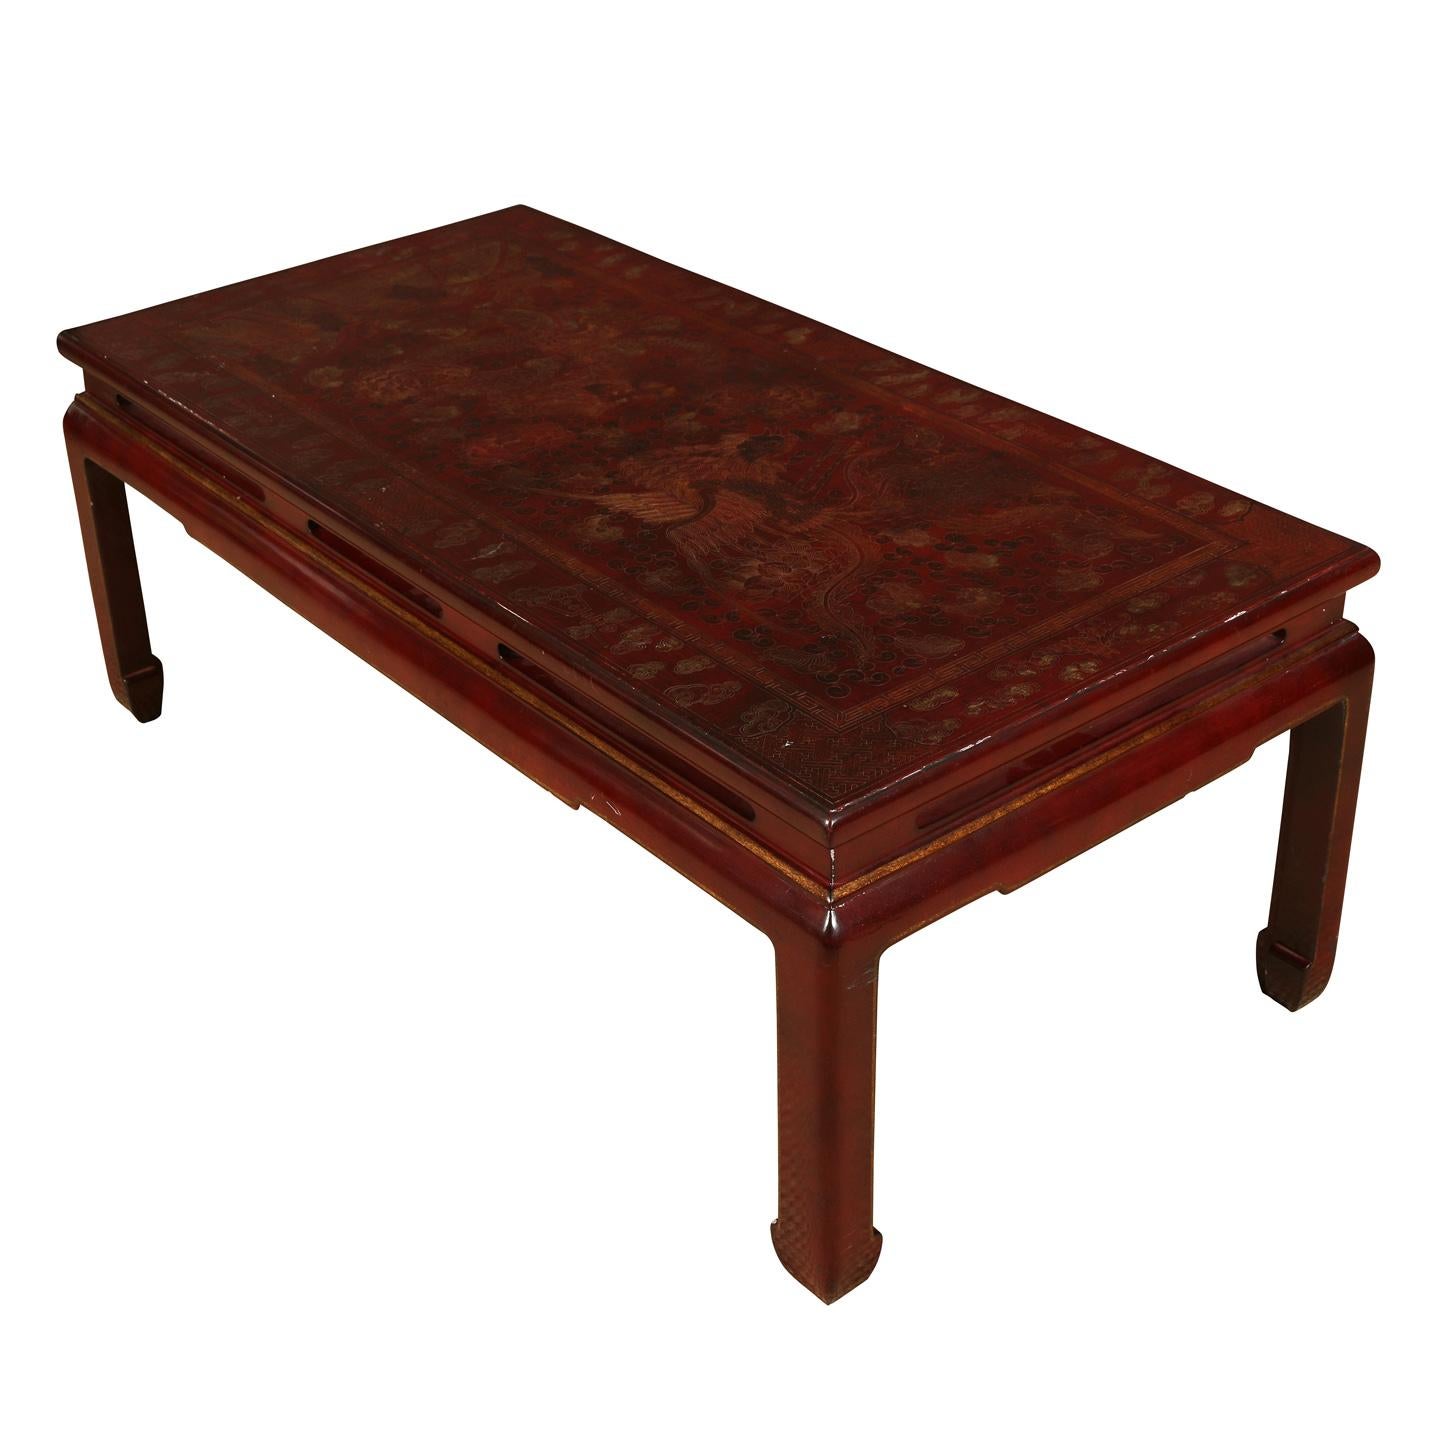 Asian red lacquer coffee table with chinoiserie etched detail with a dragon and phoenix motif.